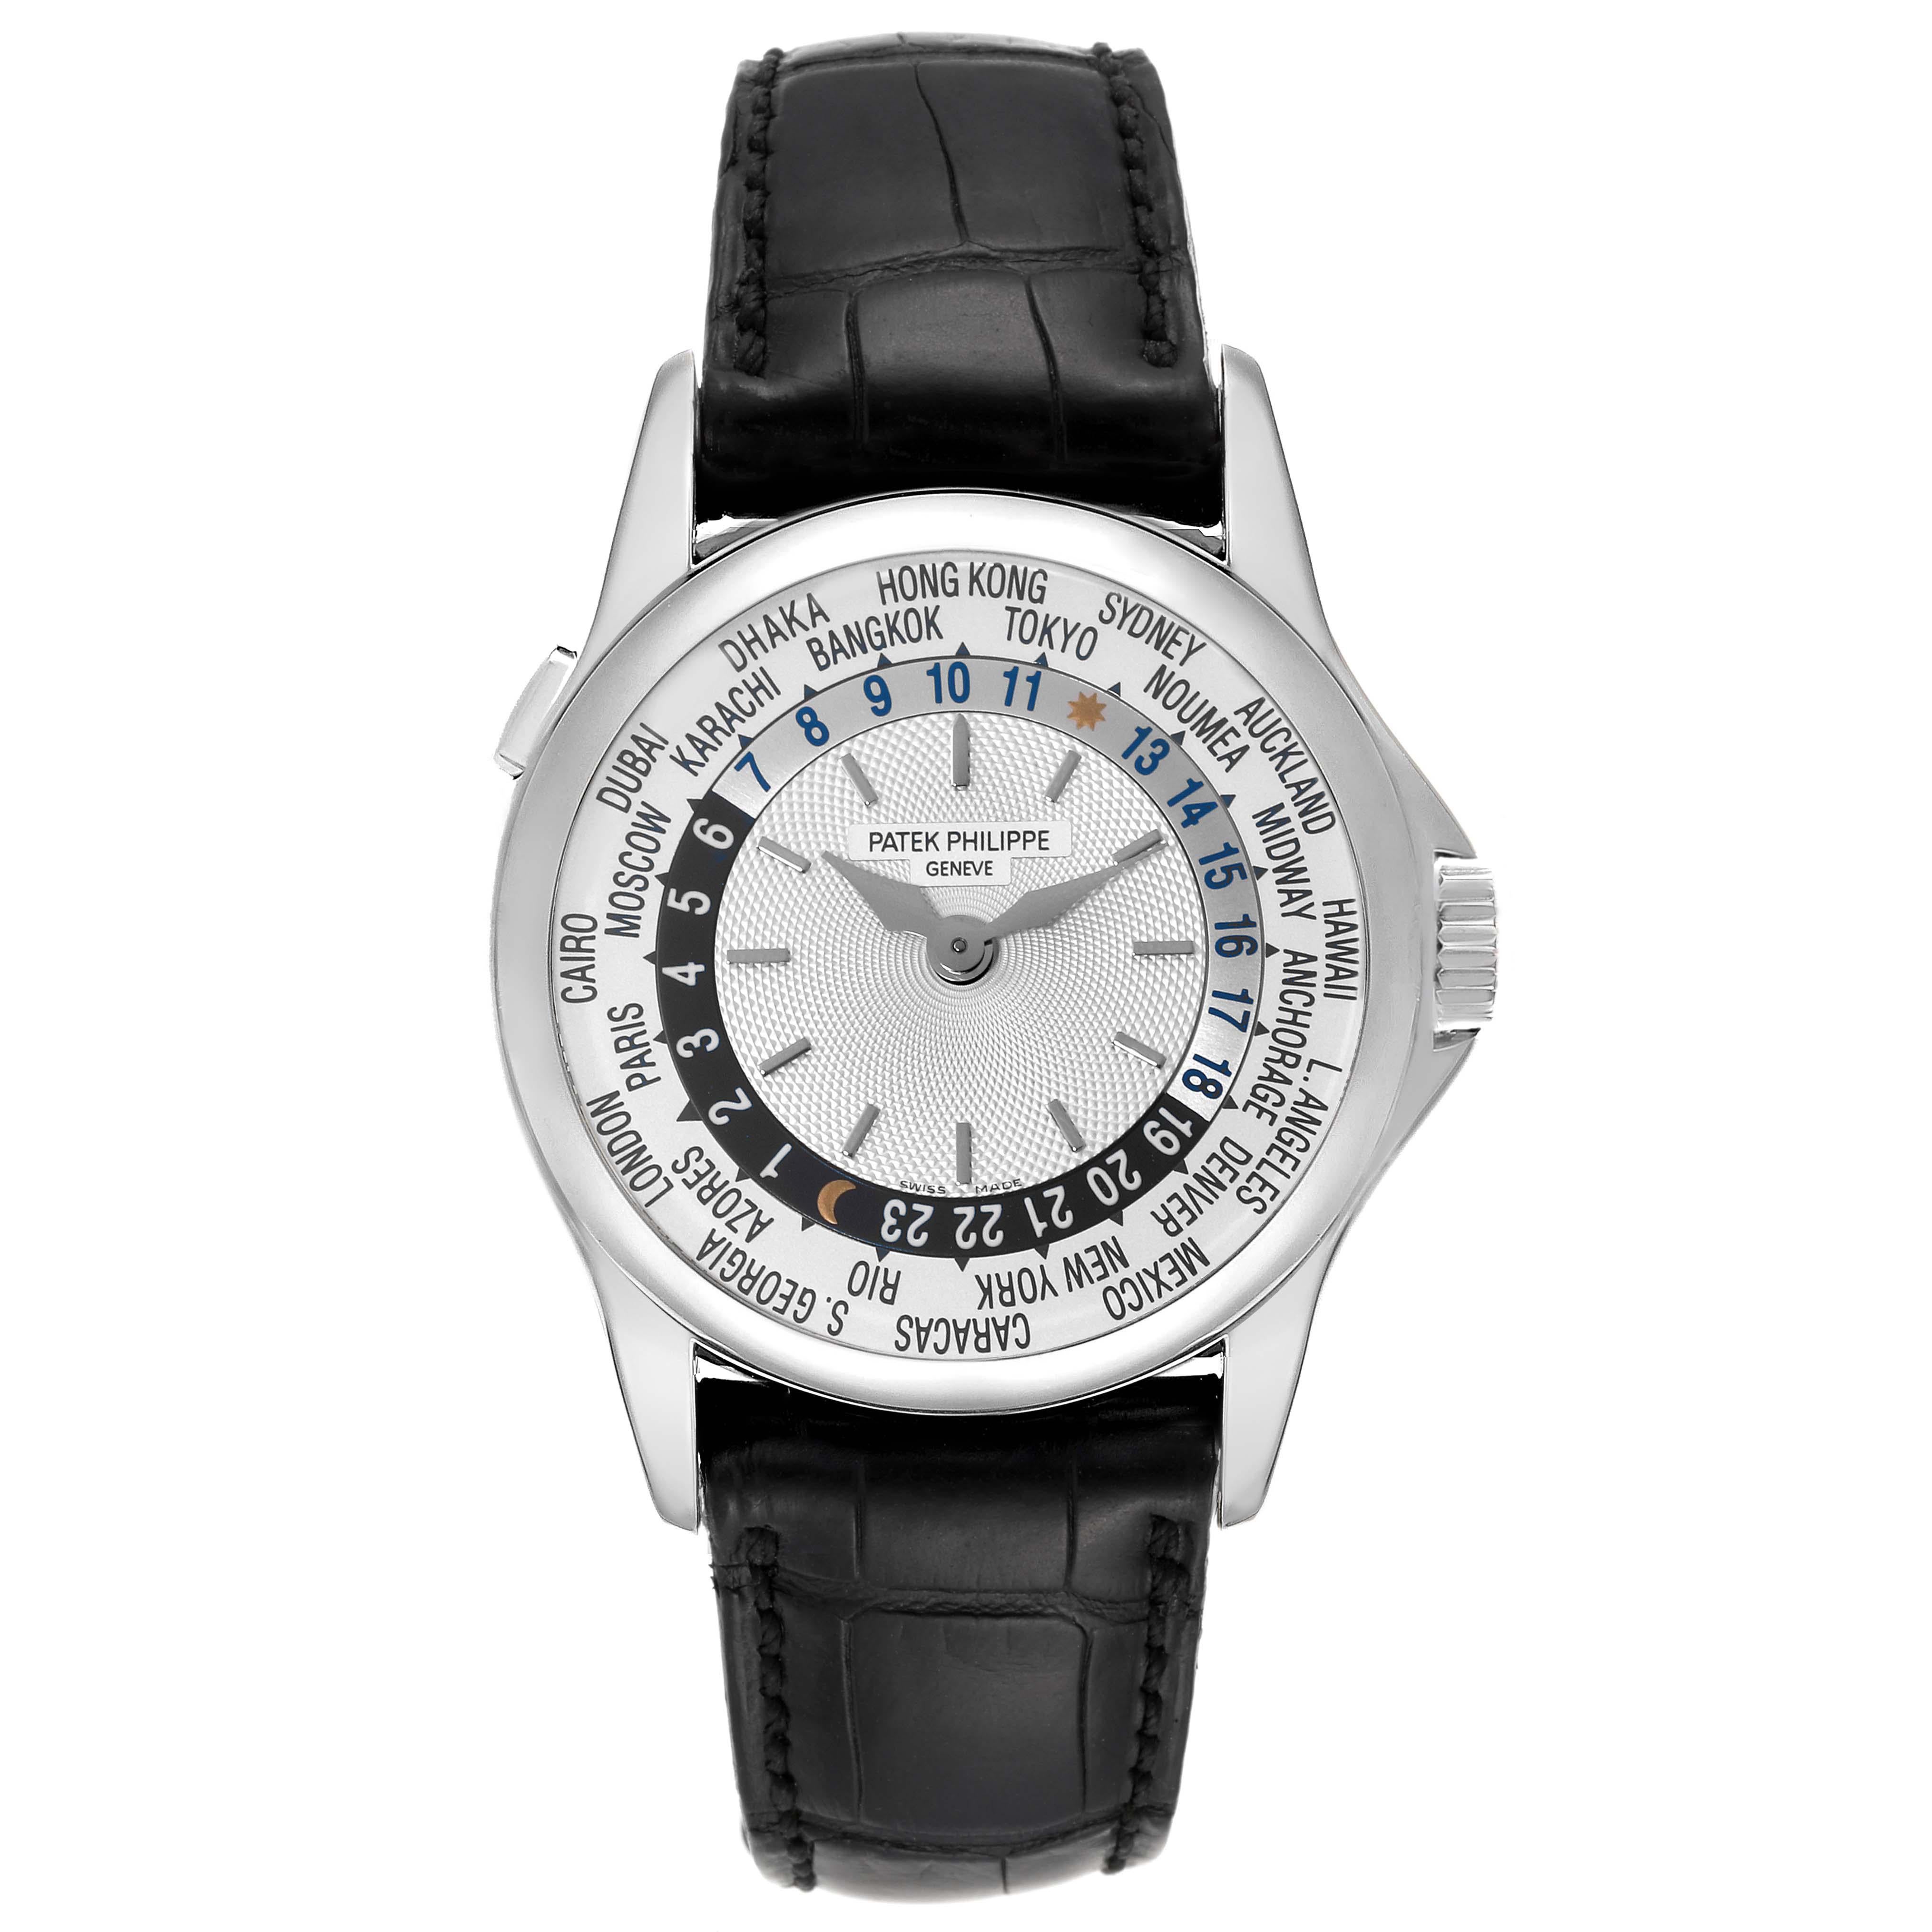 Patek Philippe World Time Automatic White Gold Mens Watch 5110. Automatic self-winding movement. Rhodium-plated with fausses cotes embellishment. Straight-line lever escapement, a 22K gold mini rotor, an anti-shock device, and a monometallic Gyromax